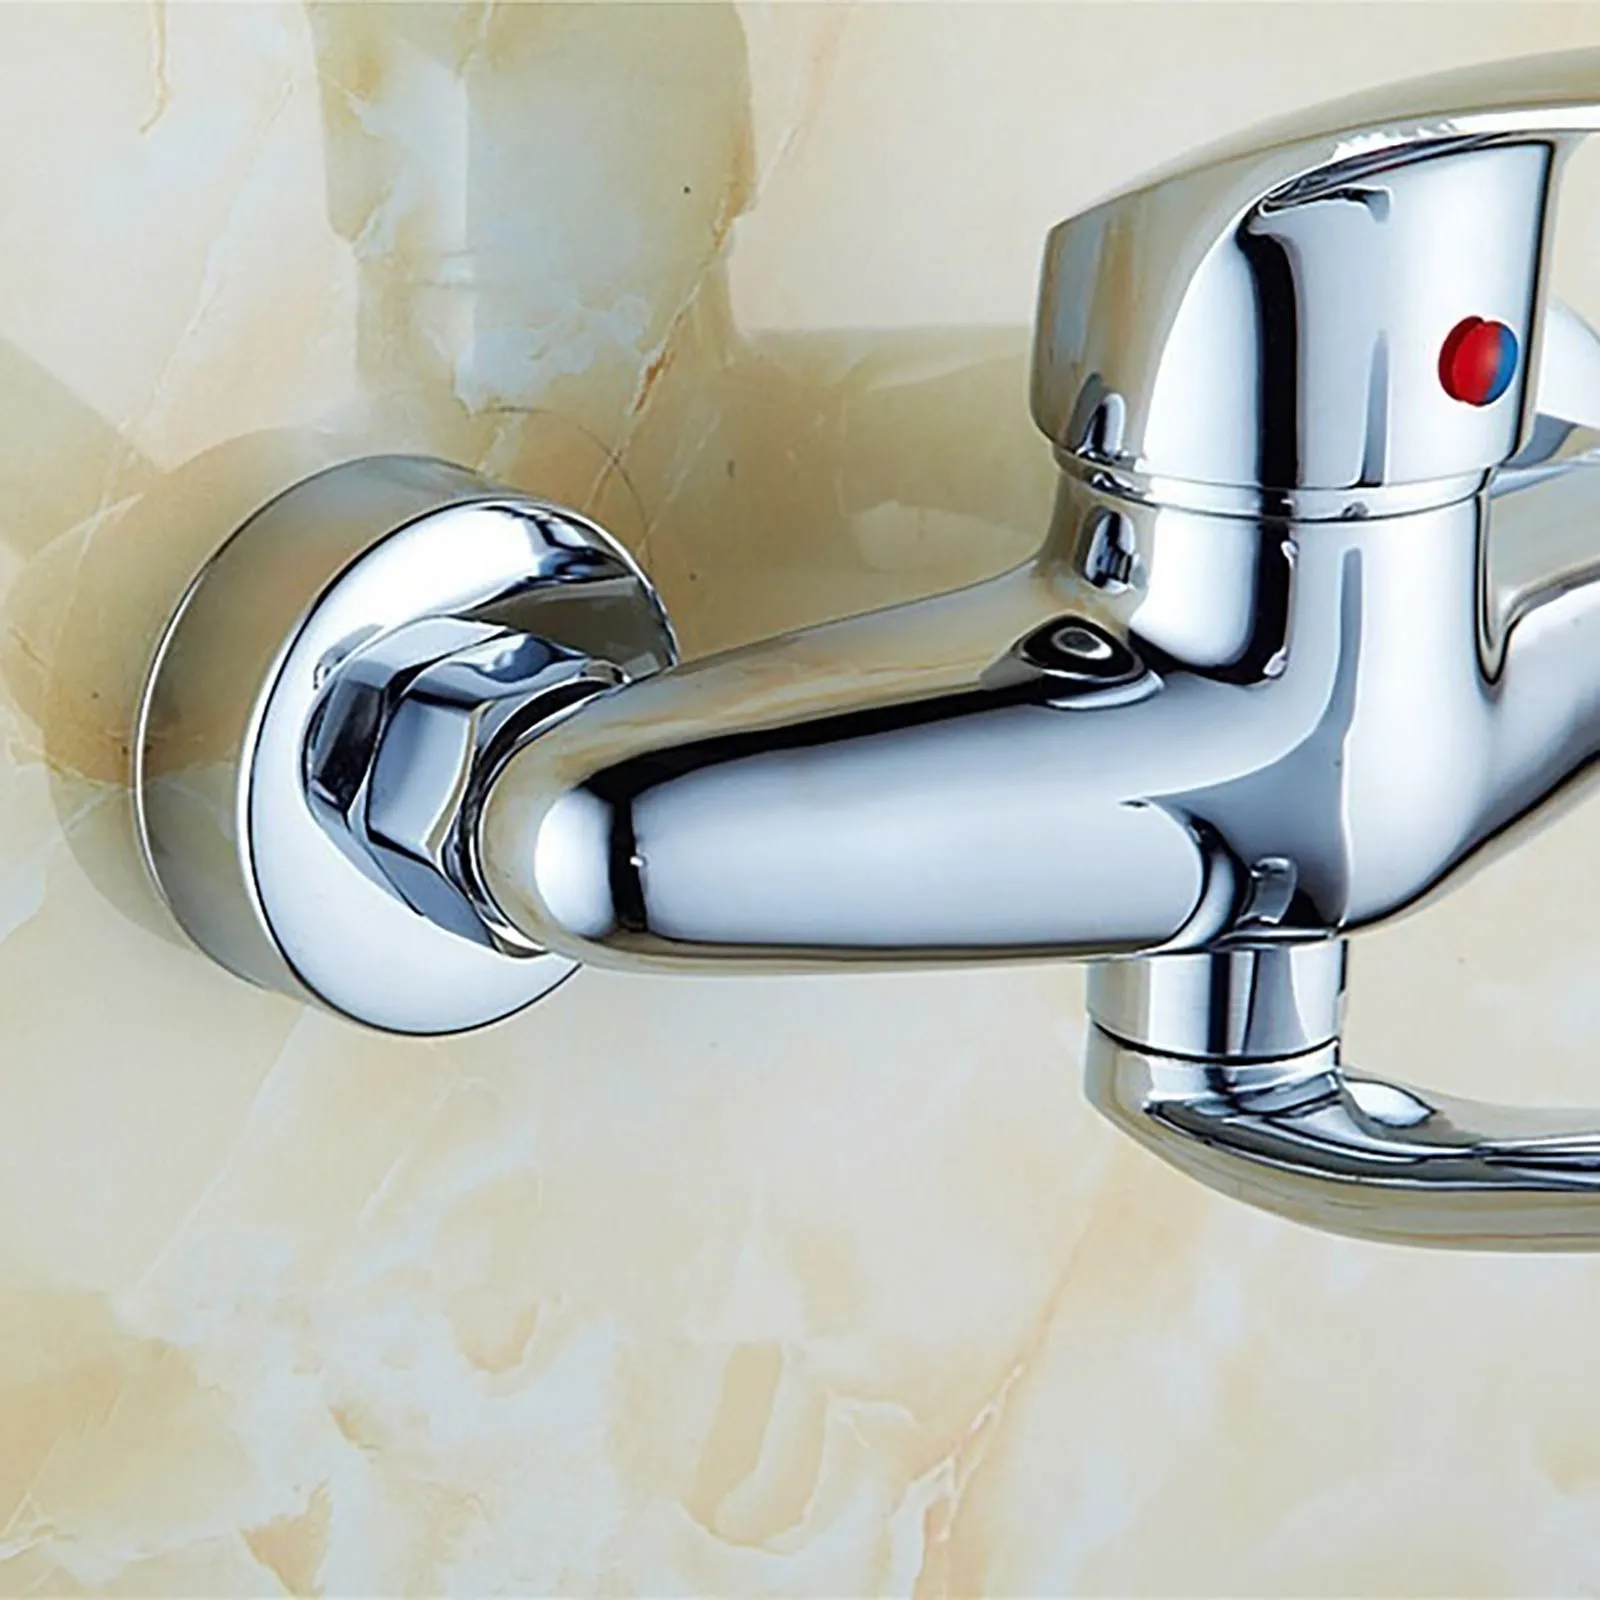 Wall-Mounted Tap Double Hole Hot & Cold Fauct With Spout Very Short 15 Cm Faucet 